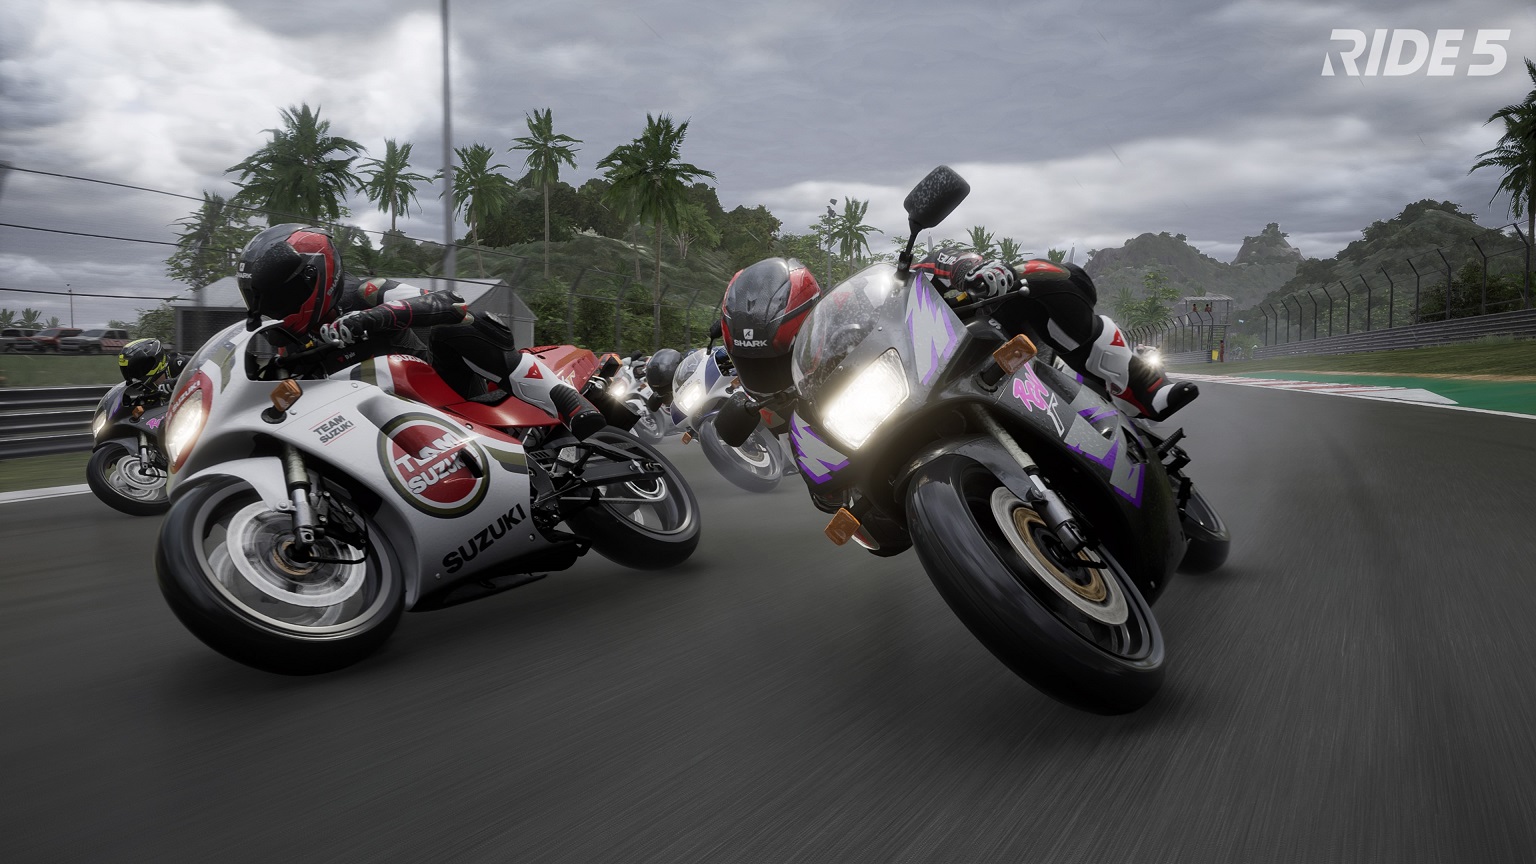 Test Ride 5 PS5